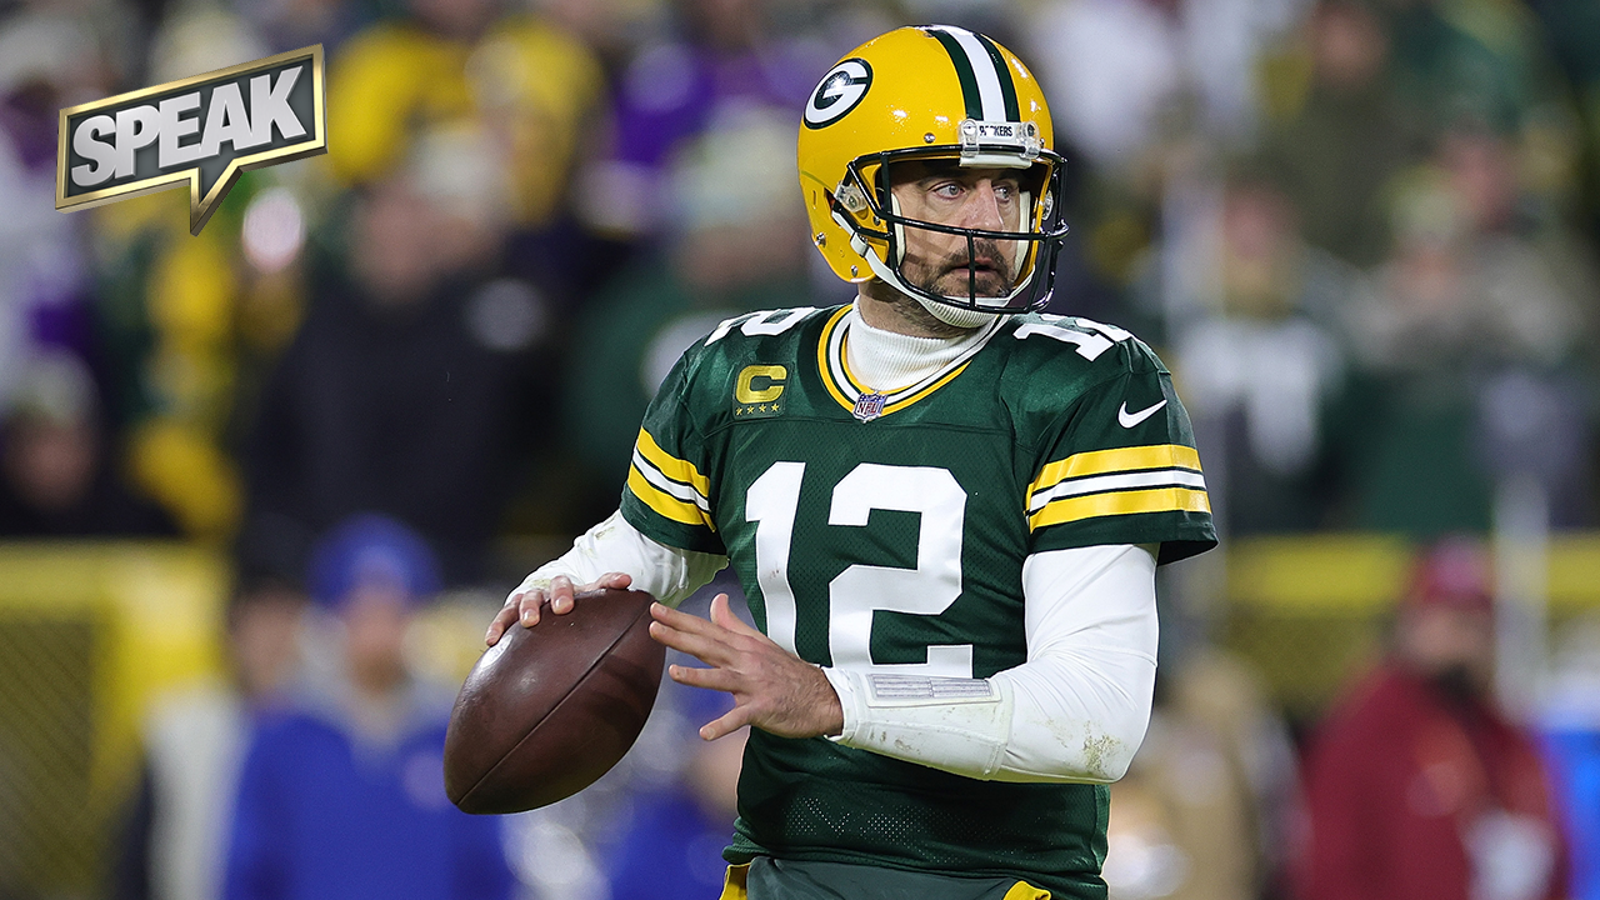 Beryl TV play-621a4e6d80007ec--SPEAK_Thumbnail_1672872391164 As Packers spiraled, Aaron Rodgers believed. Now they can punch playoff ticket Sports 